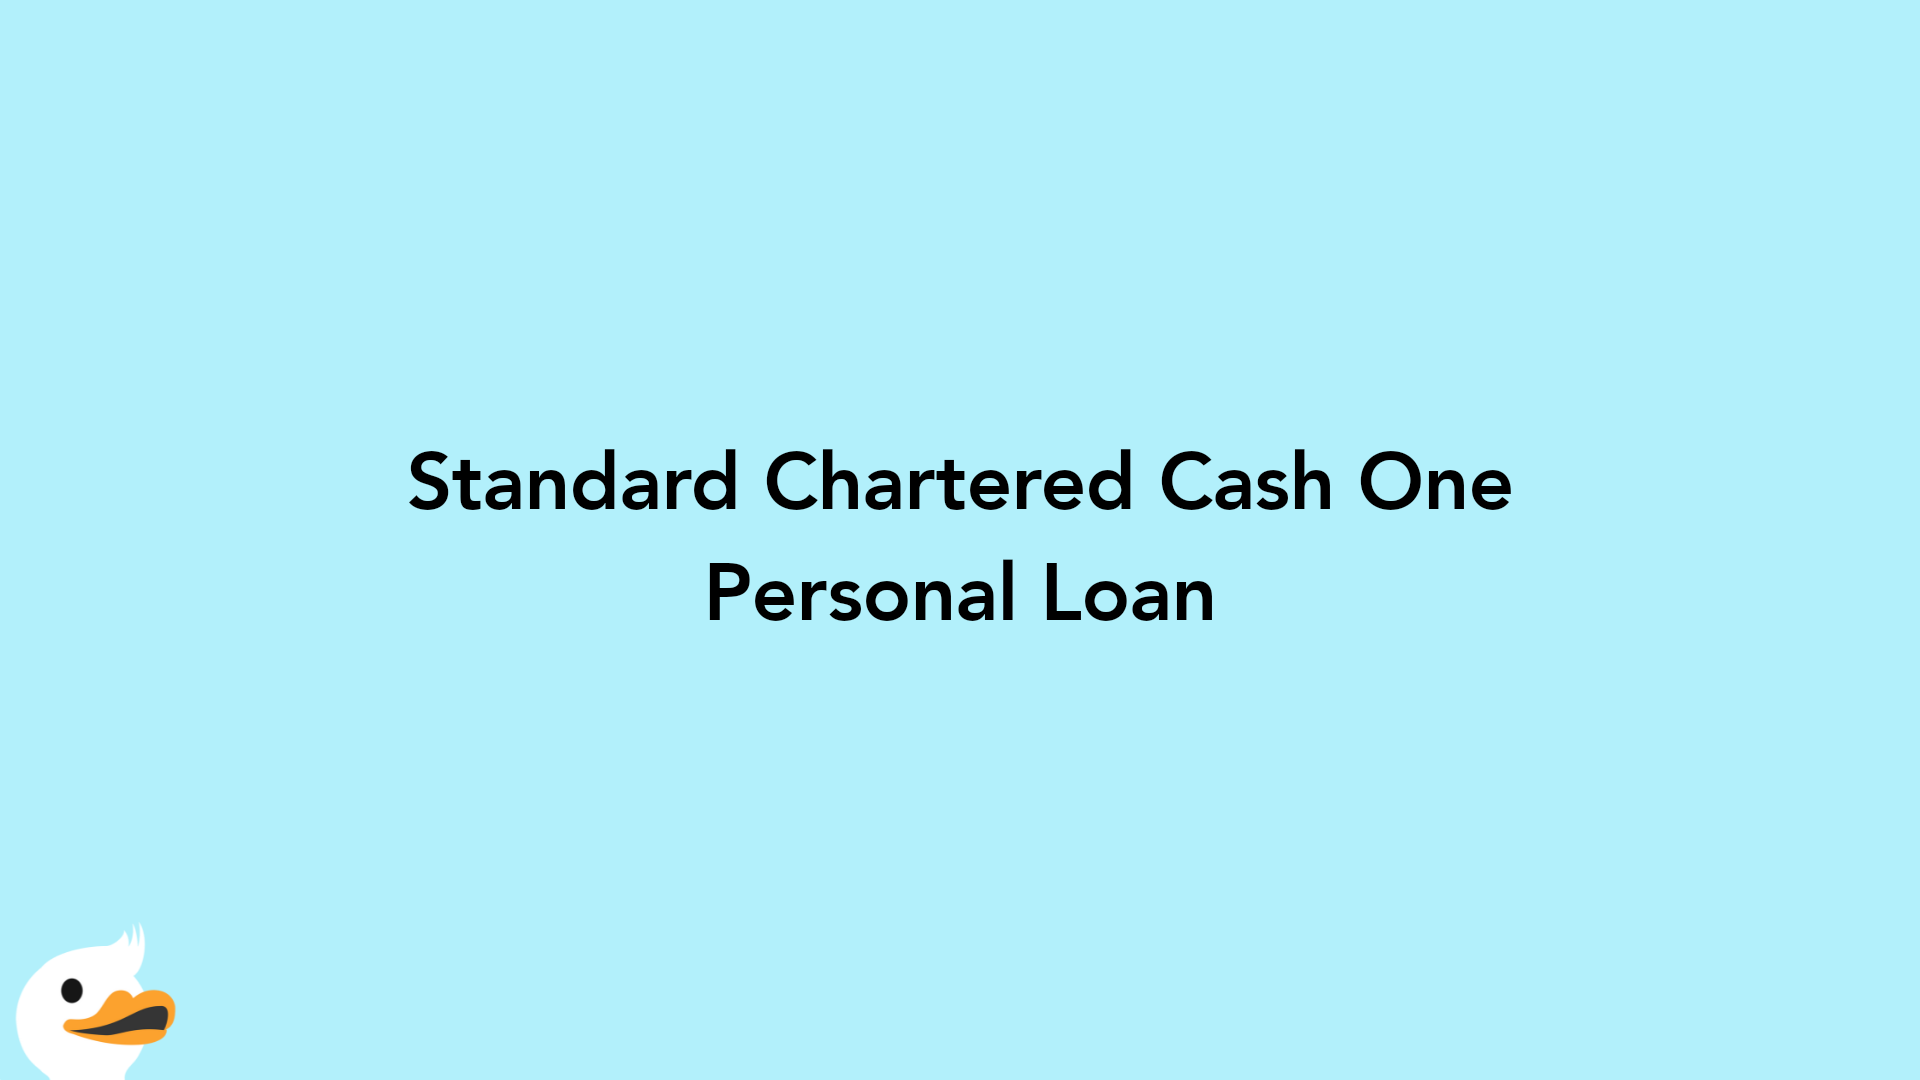 Standard Chartered Cash One Personal Loan